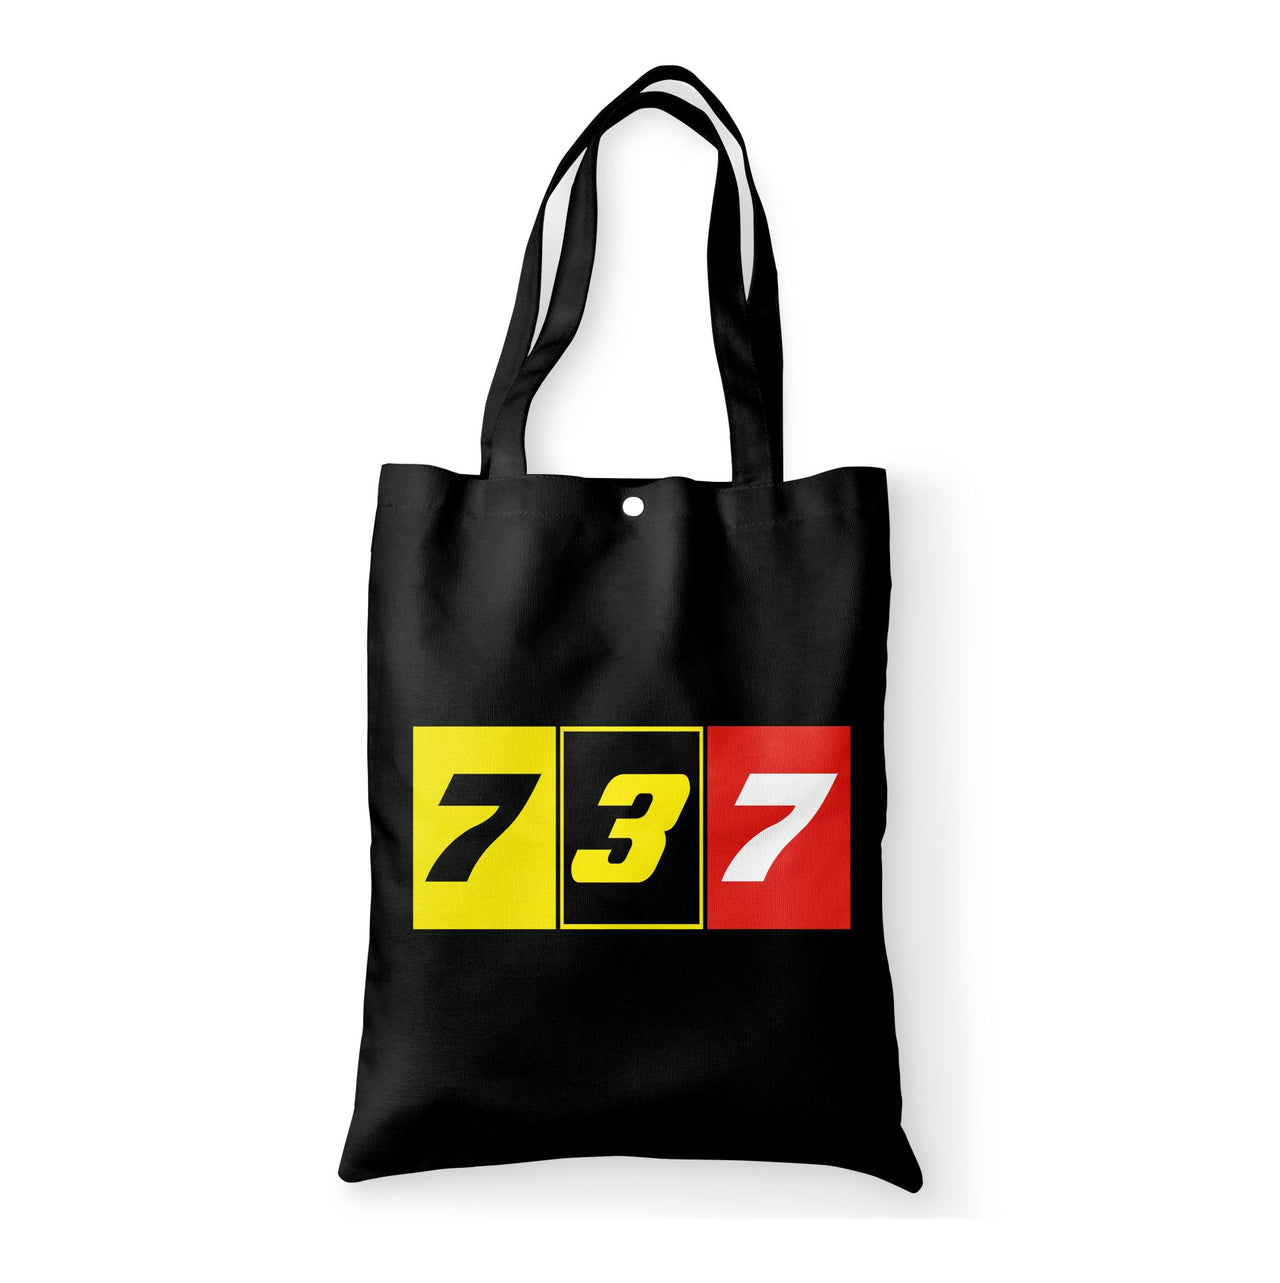 Flat Colourful 737 Designed Tote Bags